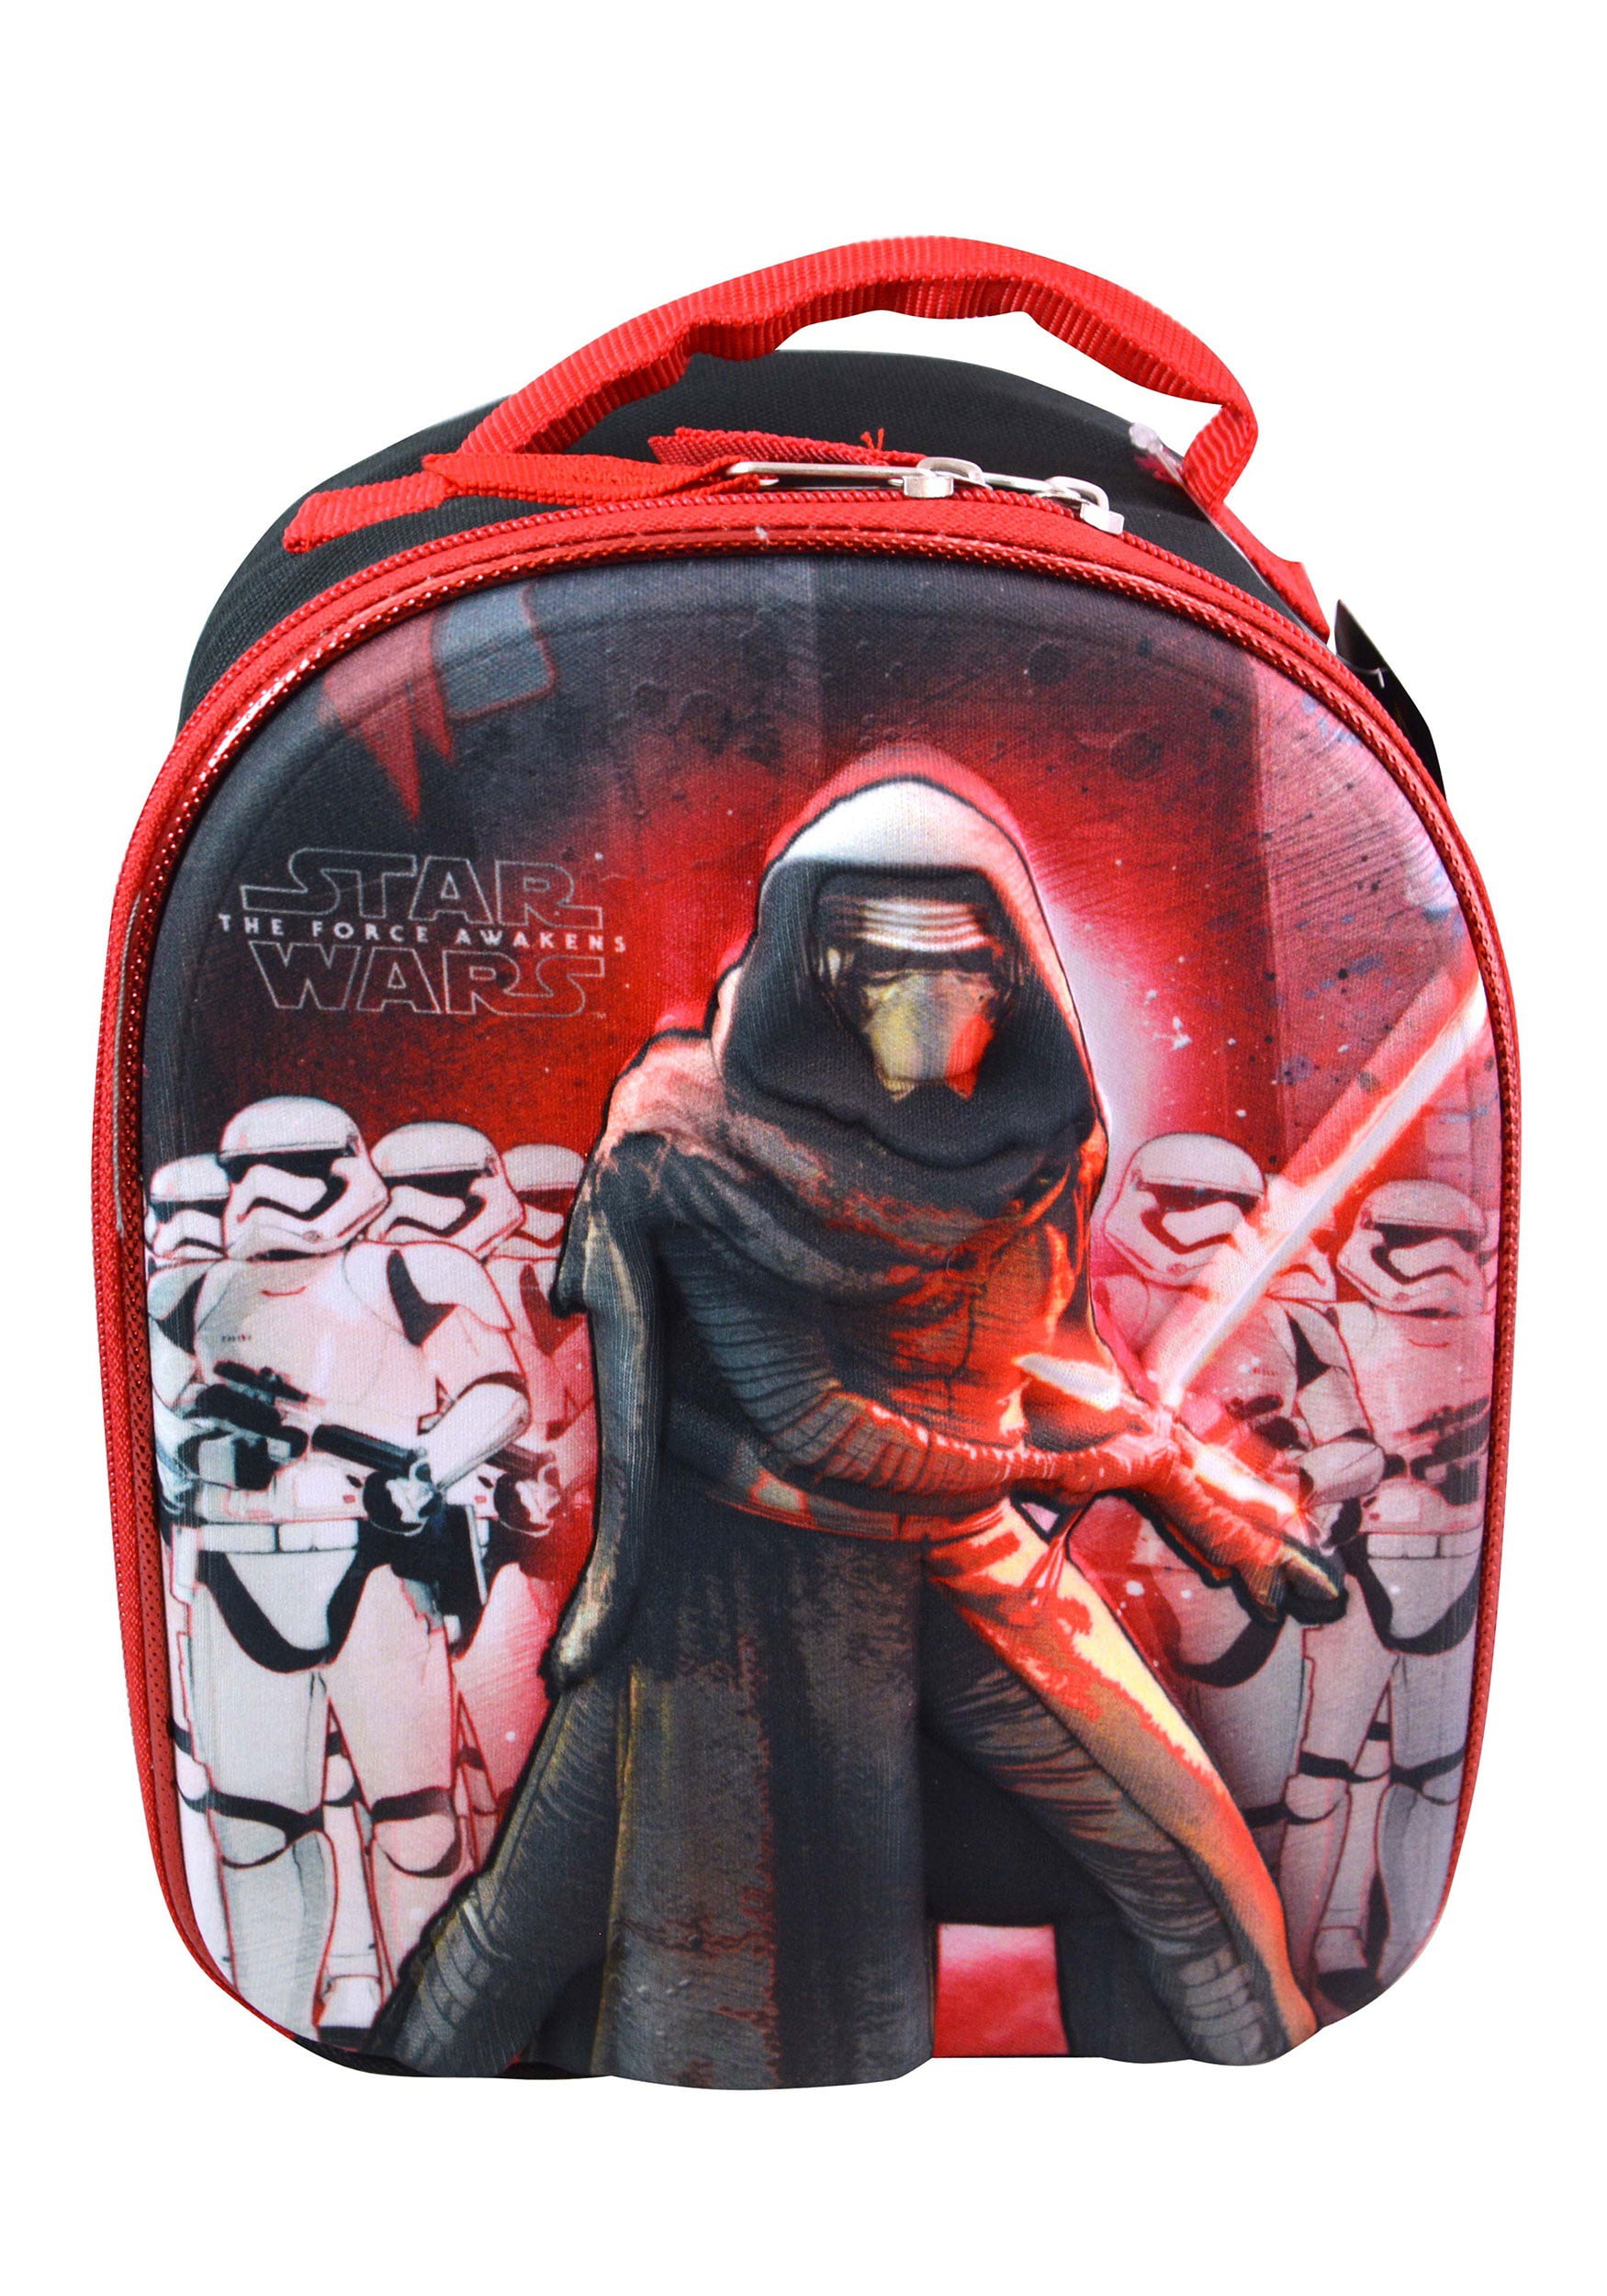 Star Wars Force Awakens Arch Carry All Metal Tin Lunch Box Kylo Ren 